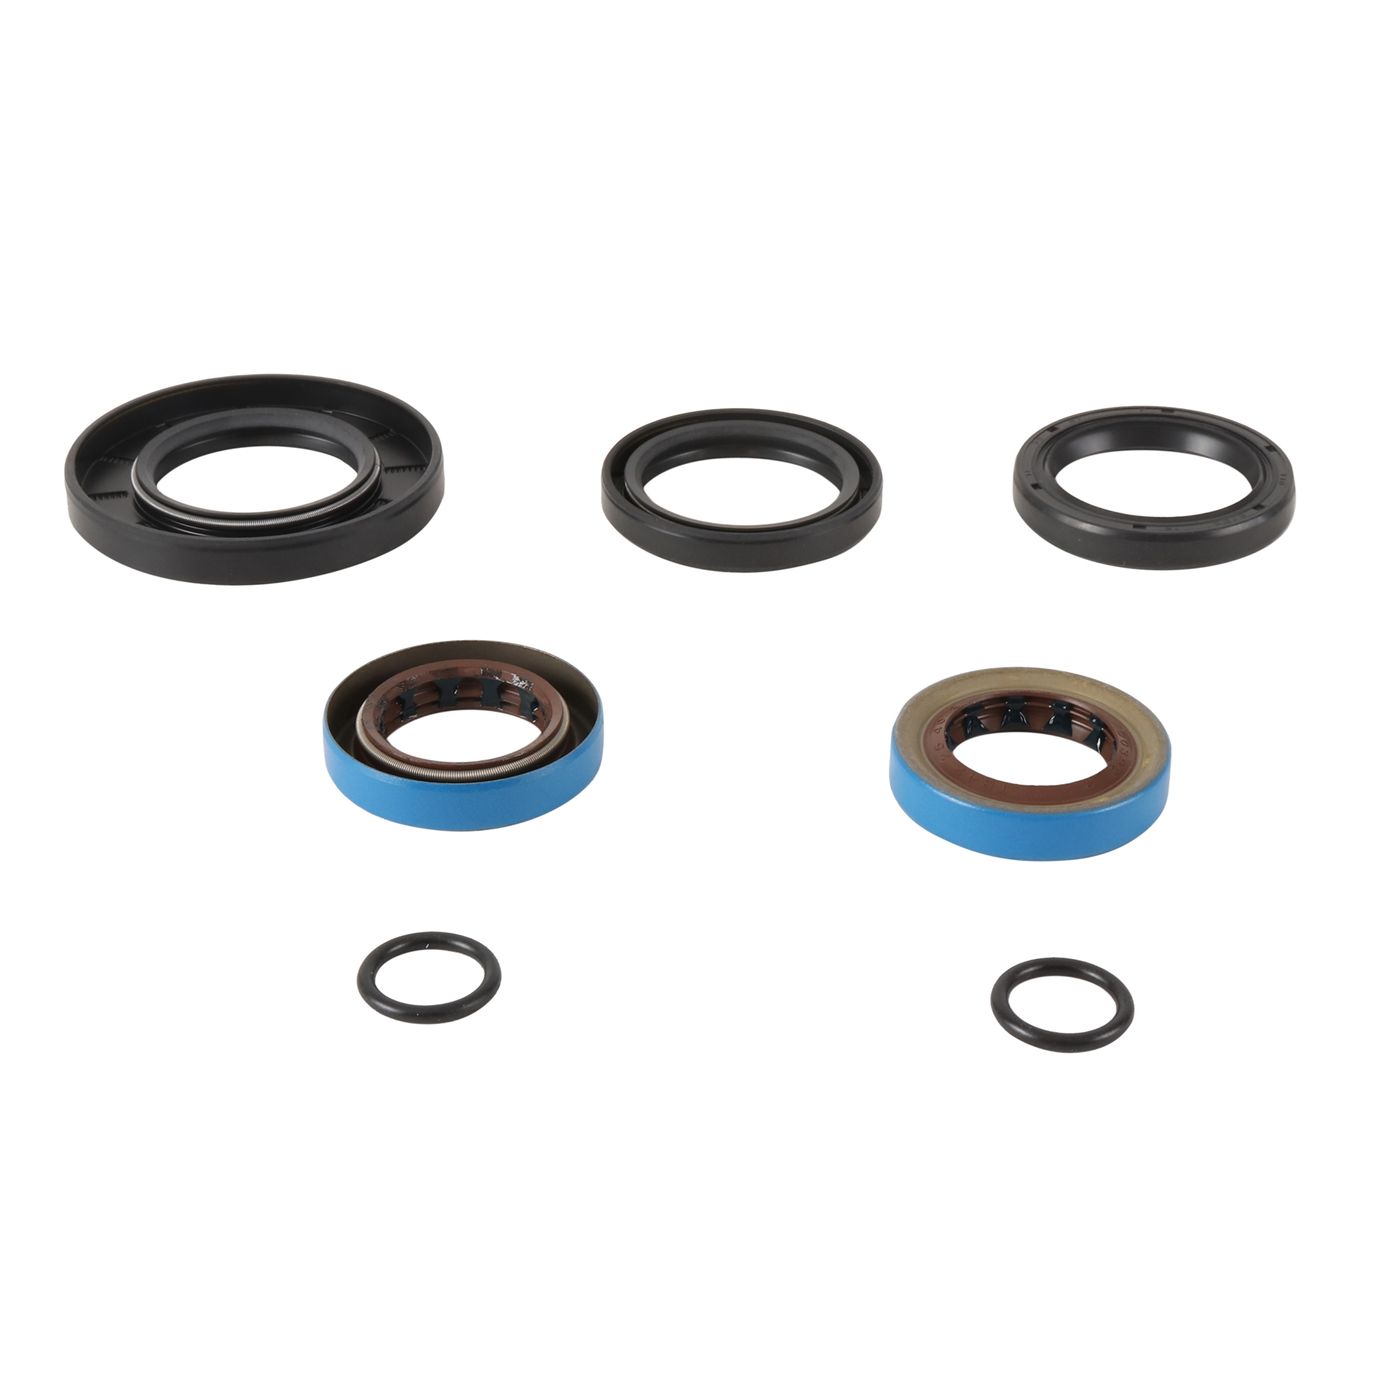 Wrp Diff Seal Kits - WRP252090-5 image